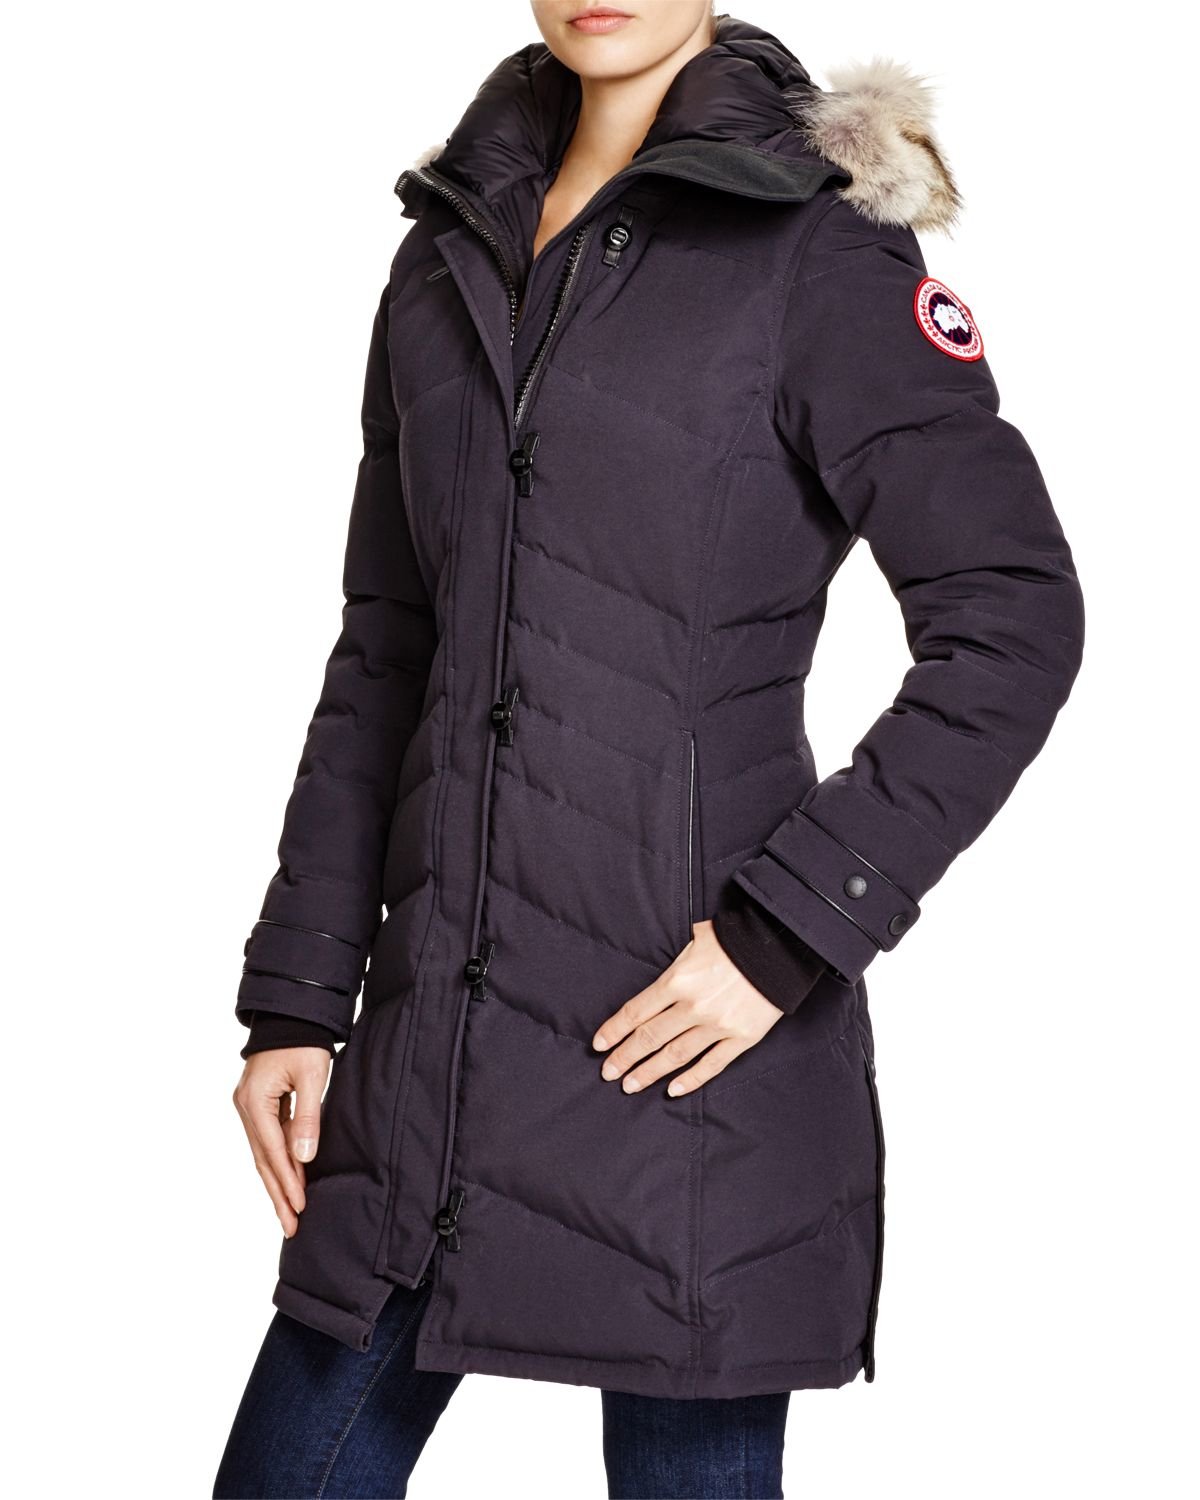 Canada Goose chilliwack parka replica price - Many Different Styles Canada Goose Expedition Parka London About 5 ...